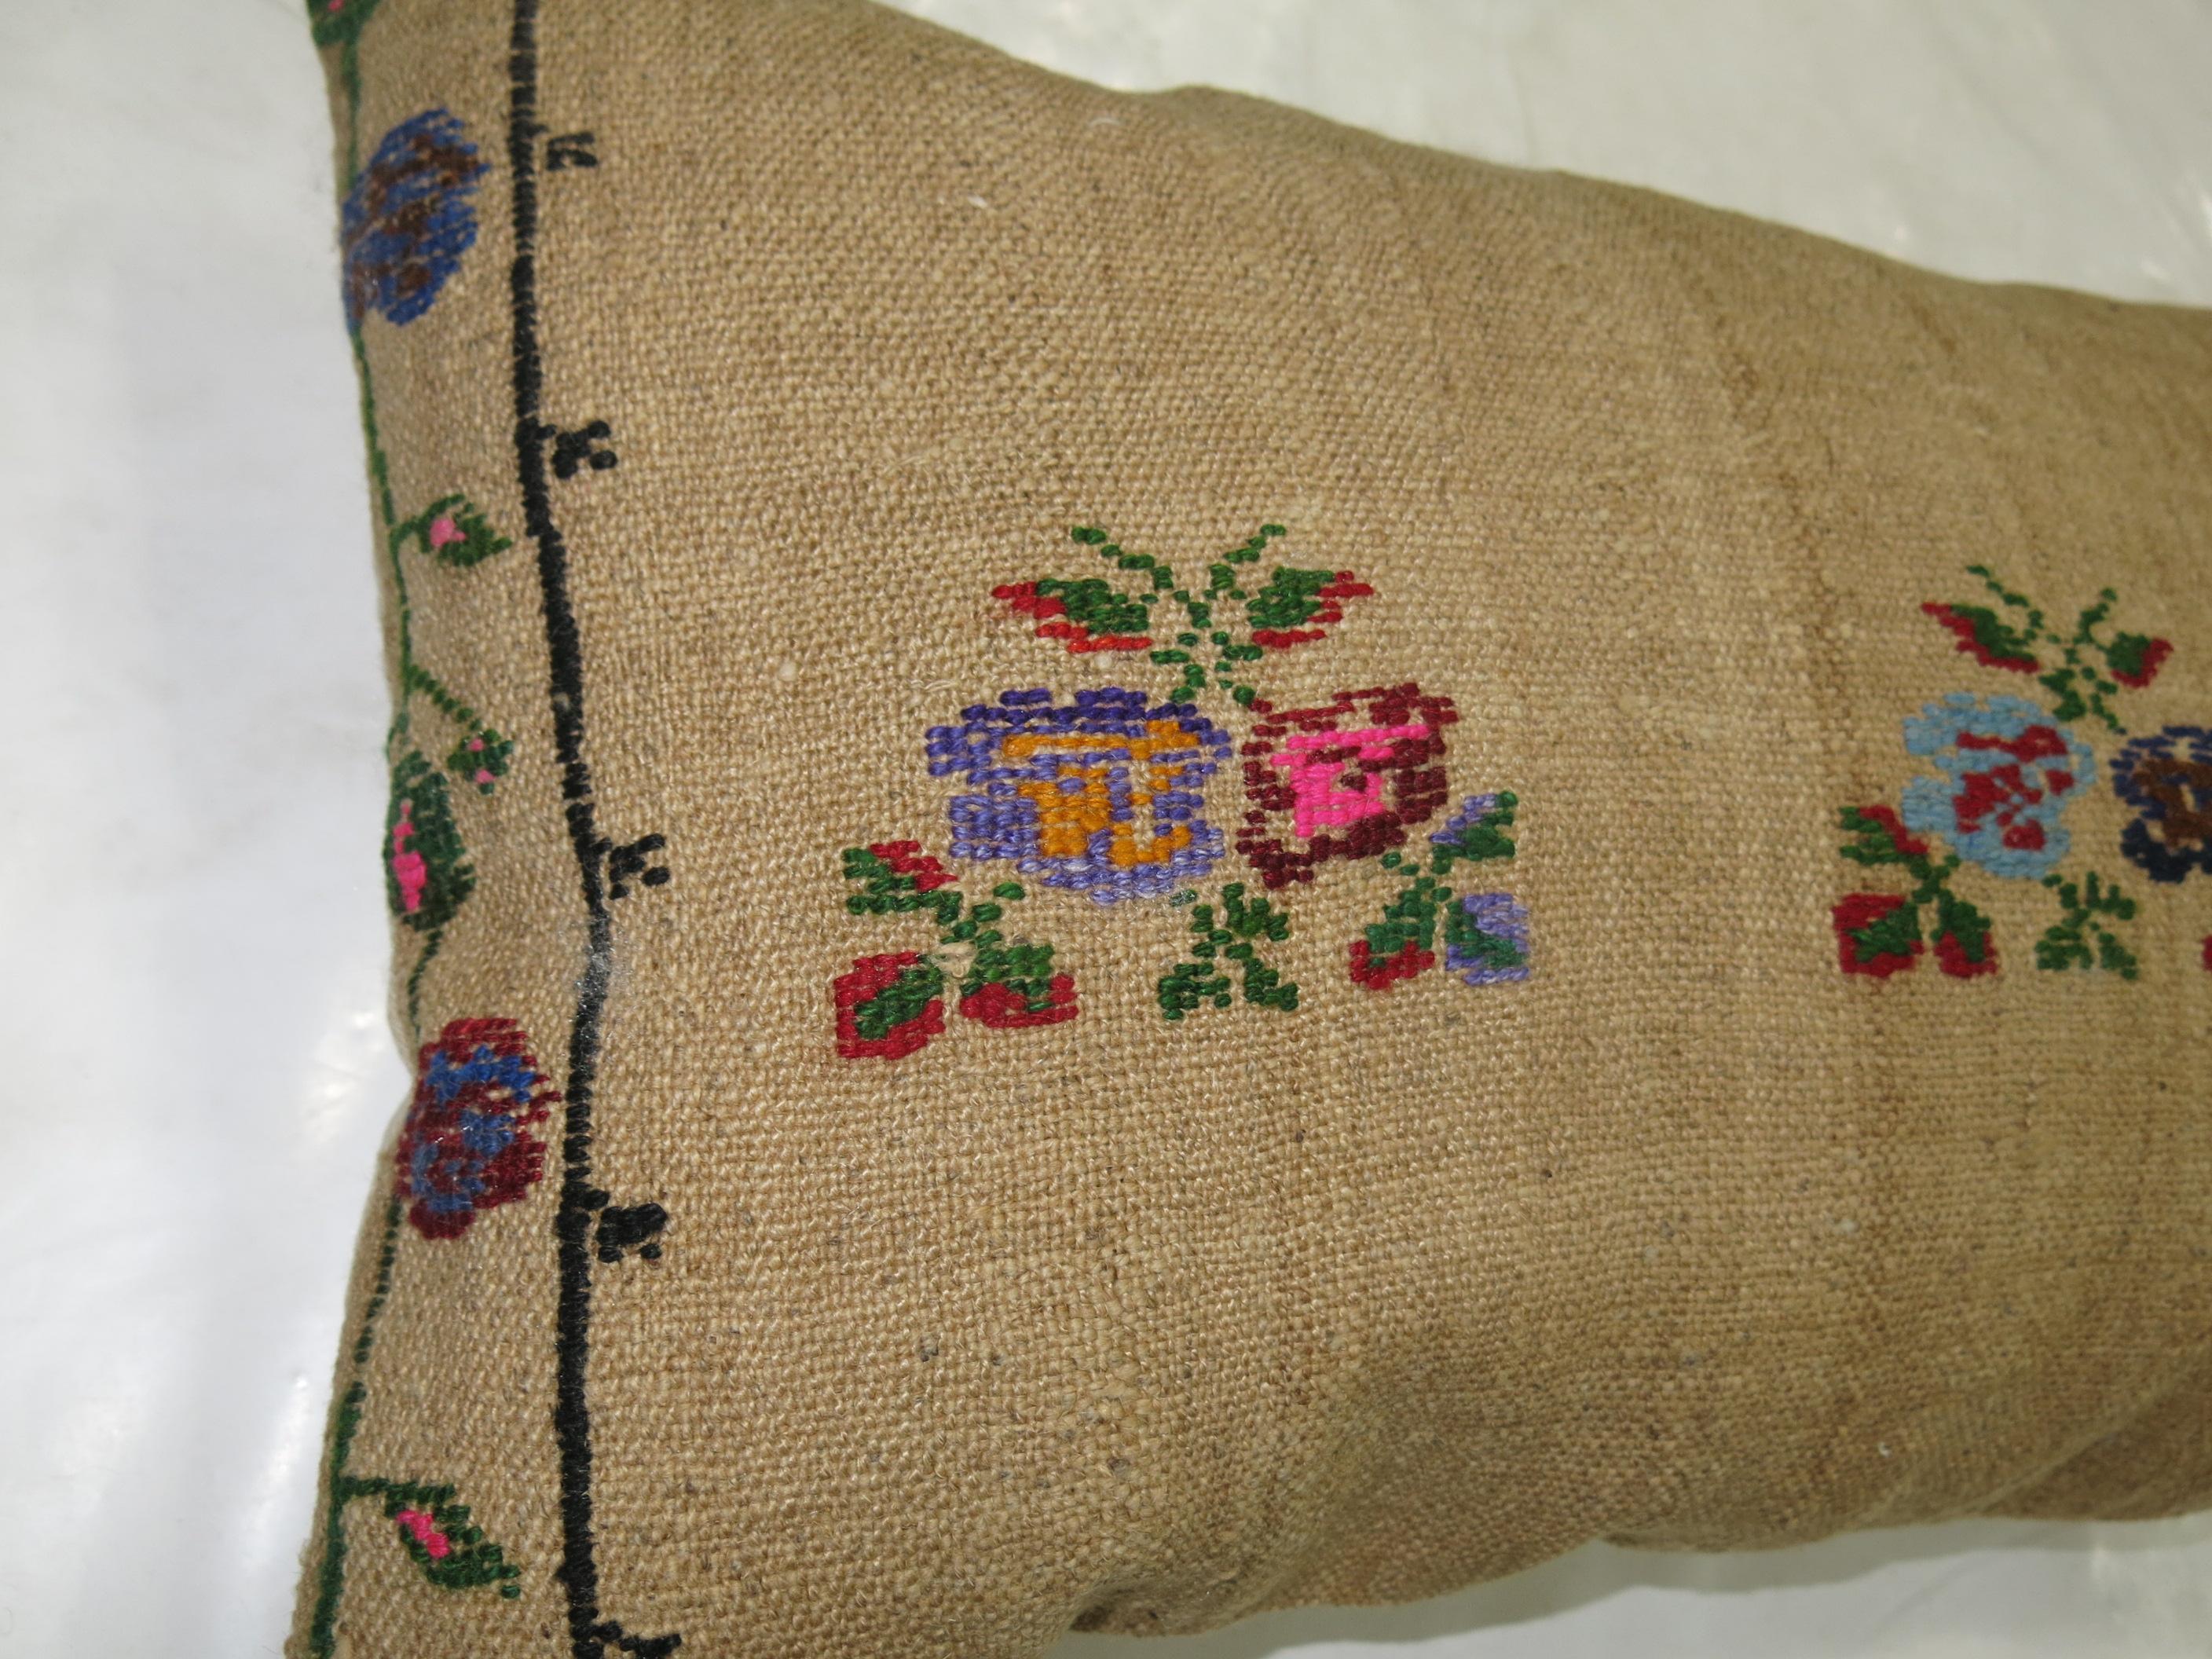 Pillow made from a Turkish Kilim.